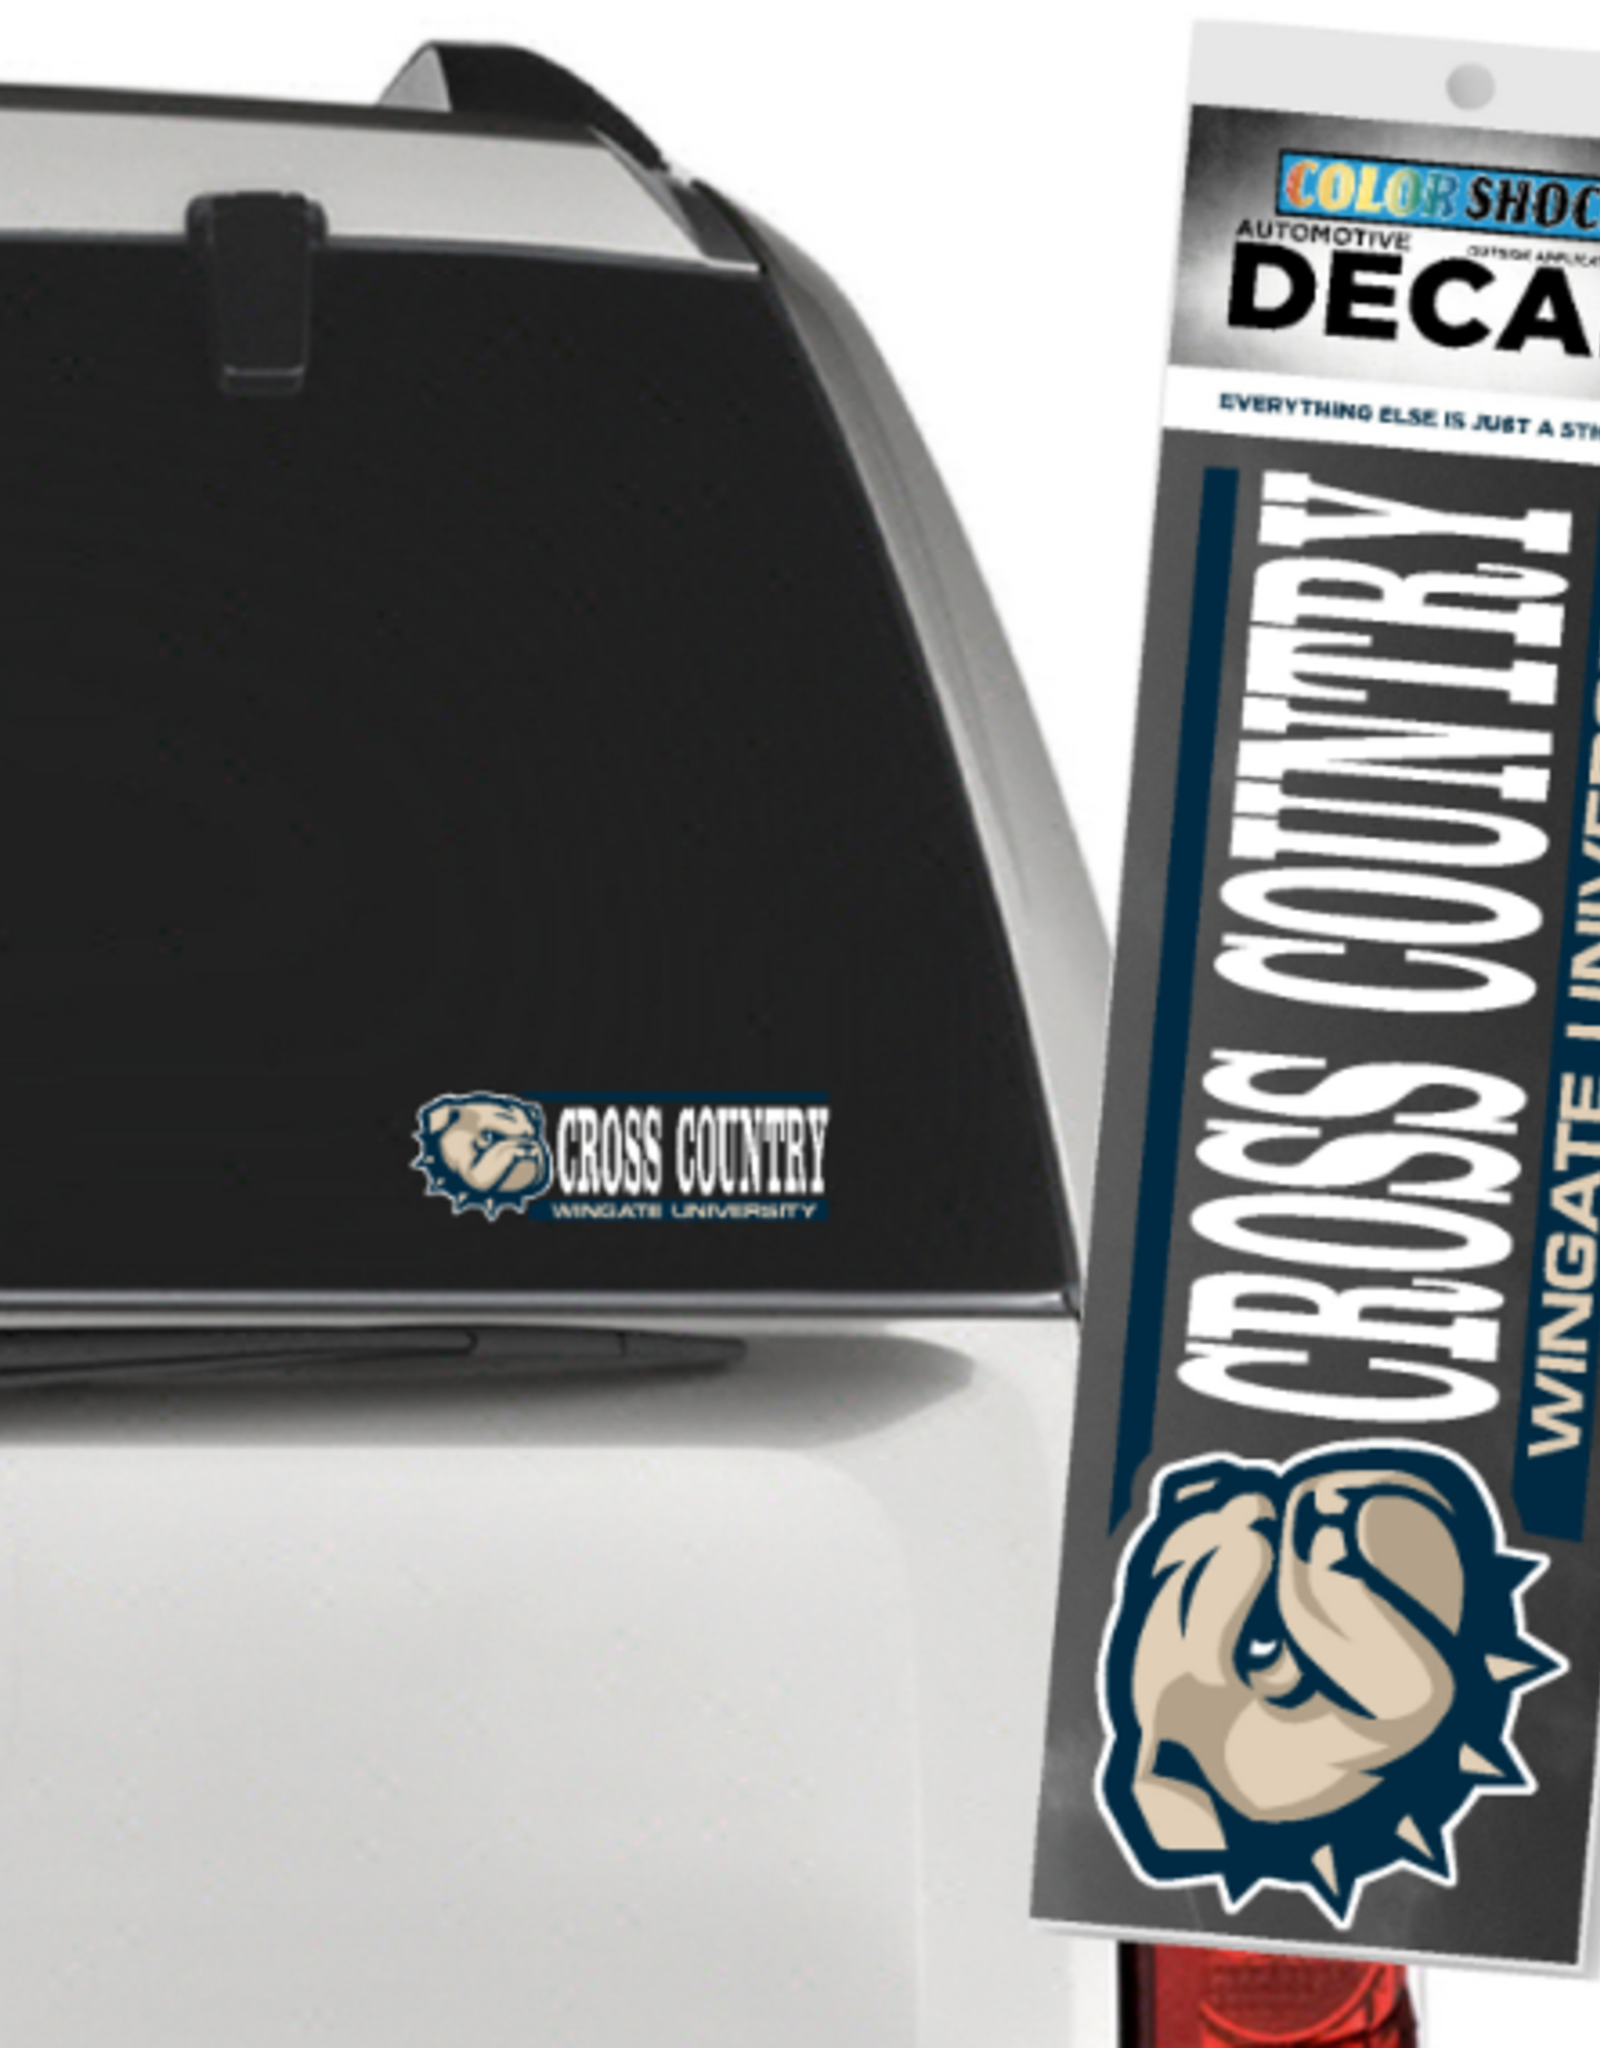 CDI 2 x 6 Dog Head Cross Country Over Wingate University Decal